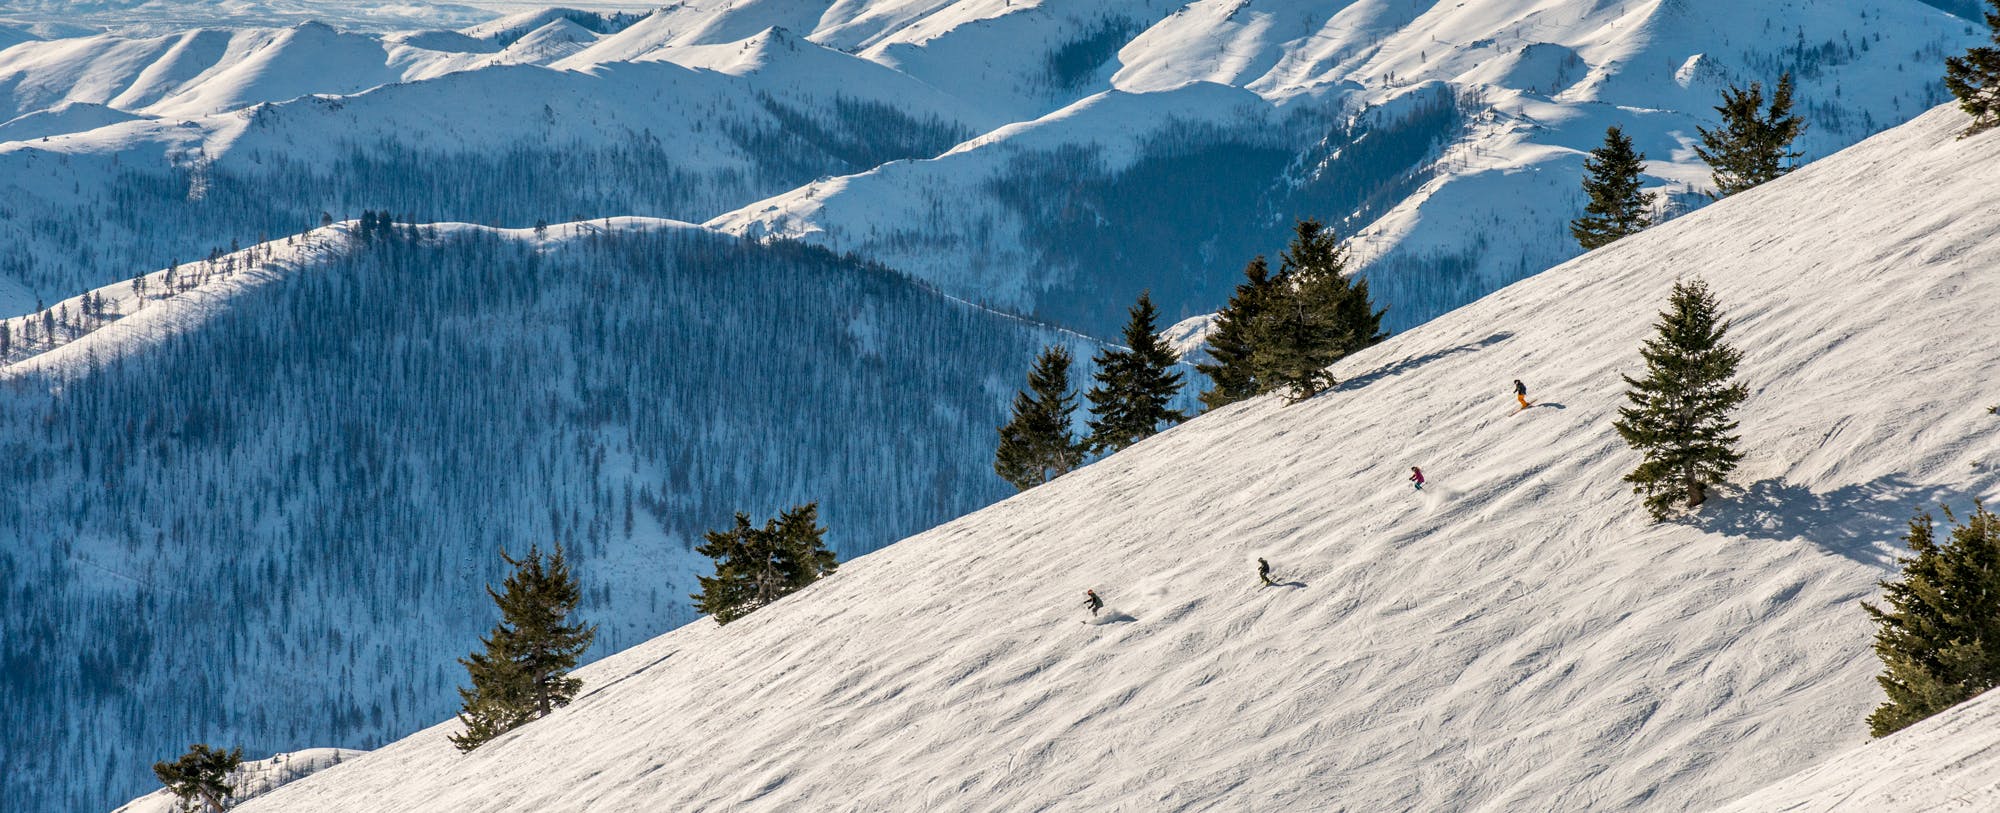 15 of the Best Ski Areas in the U.S. 